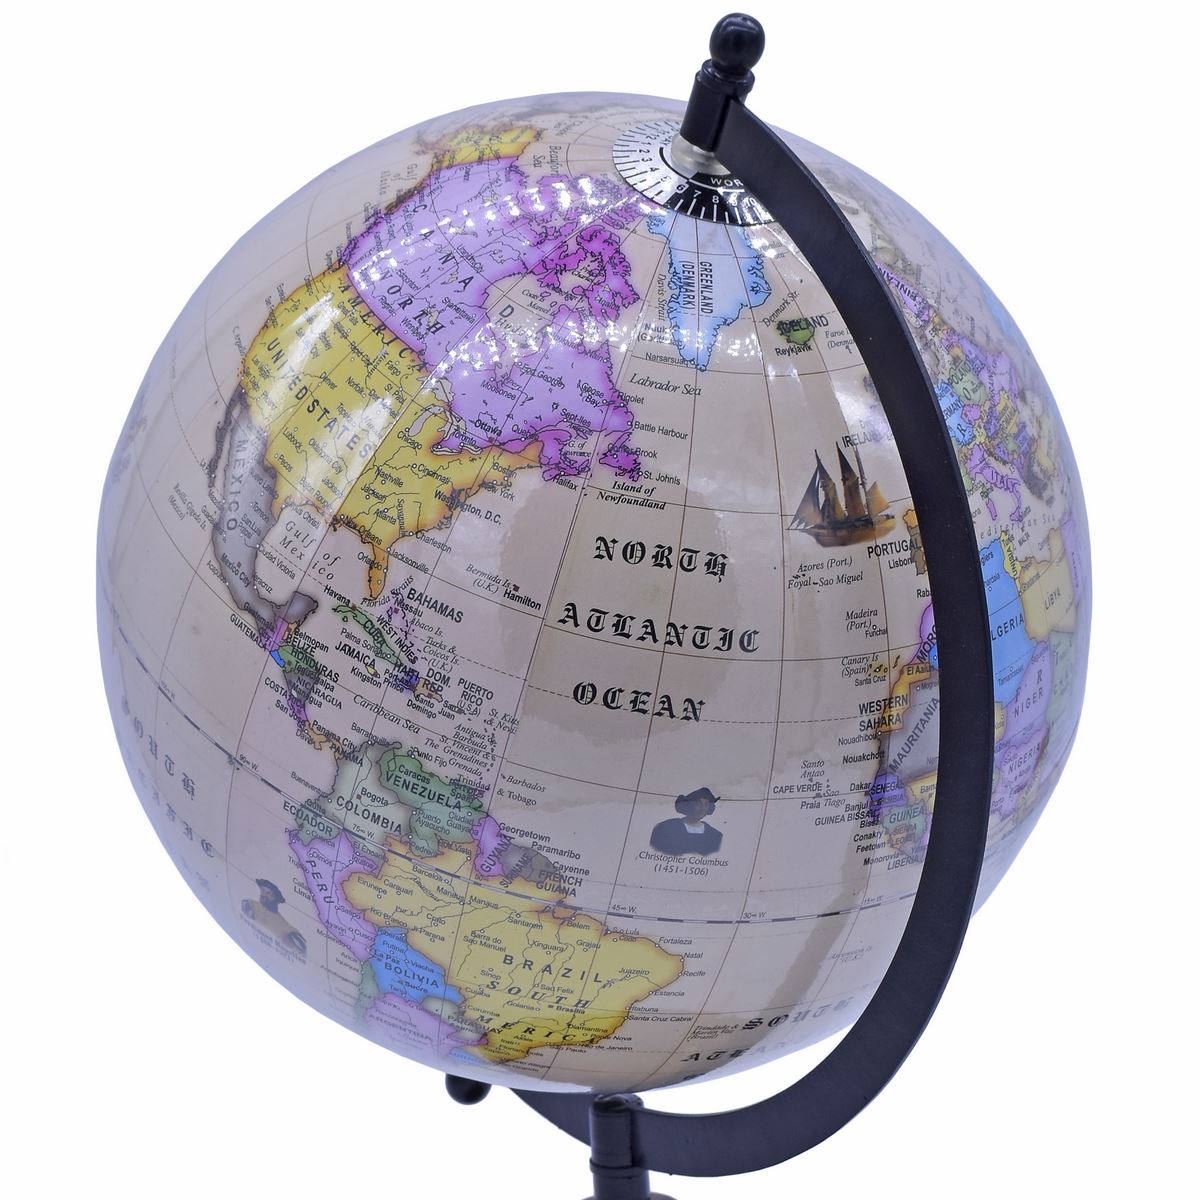 Wooden Base 8 Inch Blue World Globe Table Top - For Shops, Schools, Corporates, Office Use, Corporate Gifting